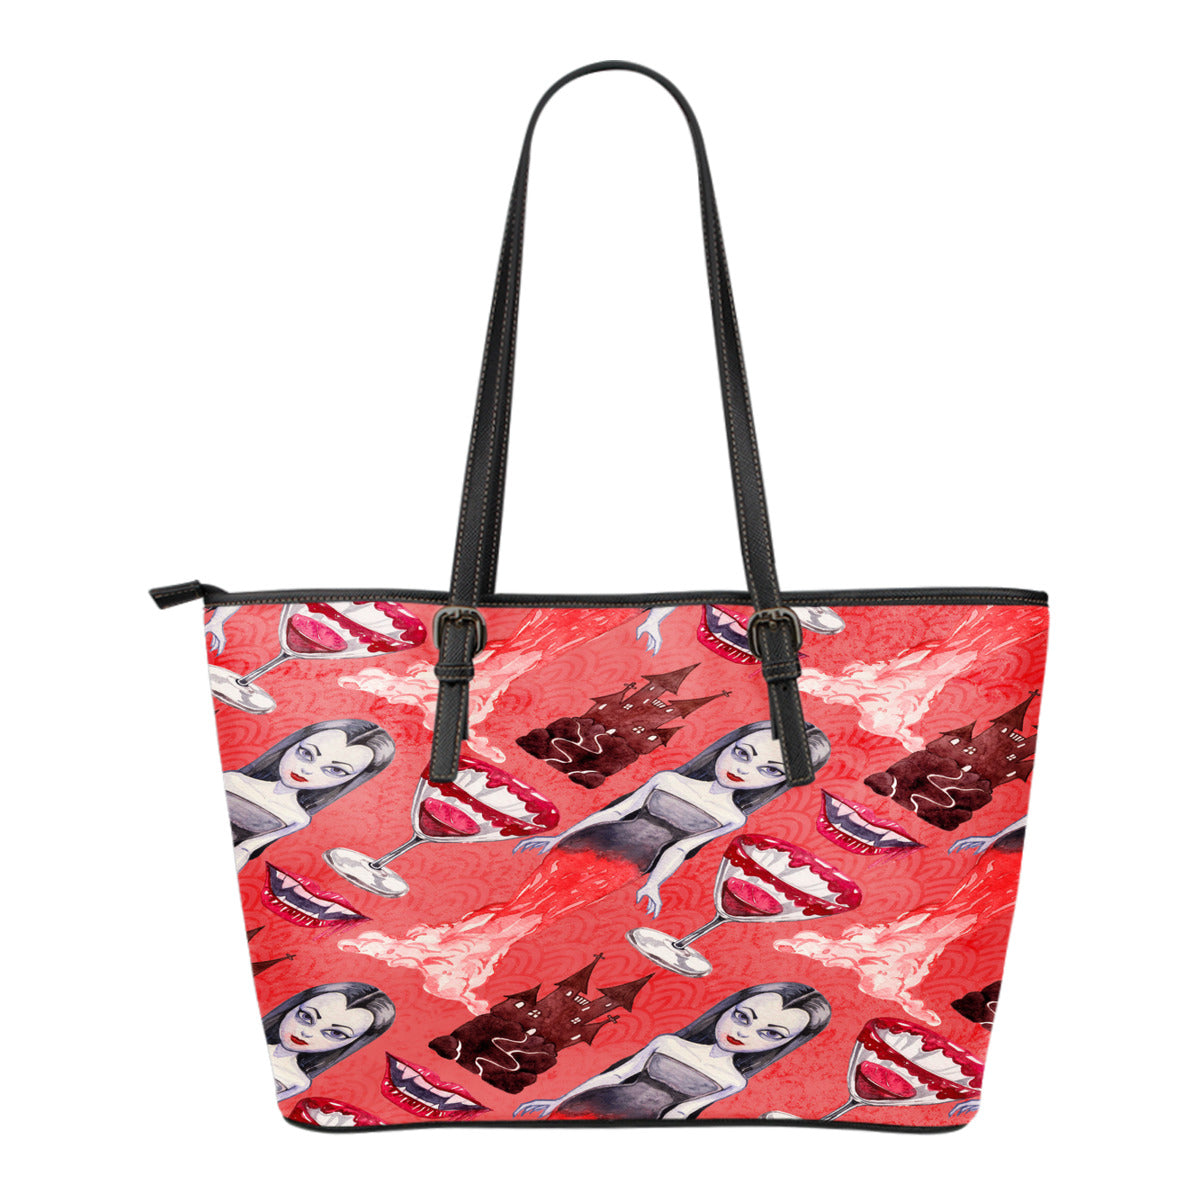 Vampire Themed Design C6 Women Small Leather Tote Bag